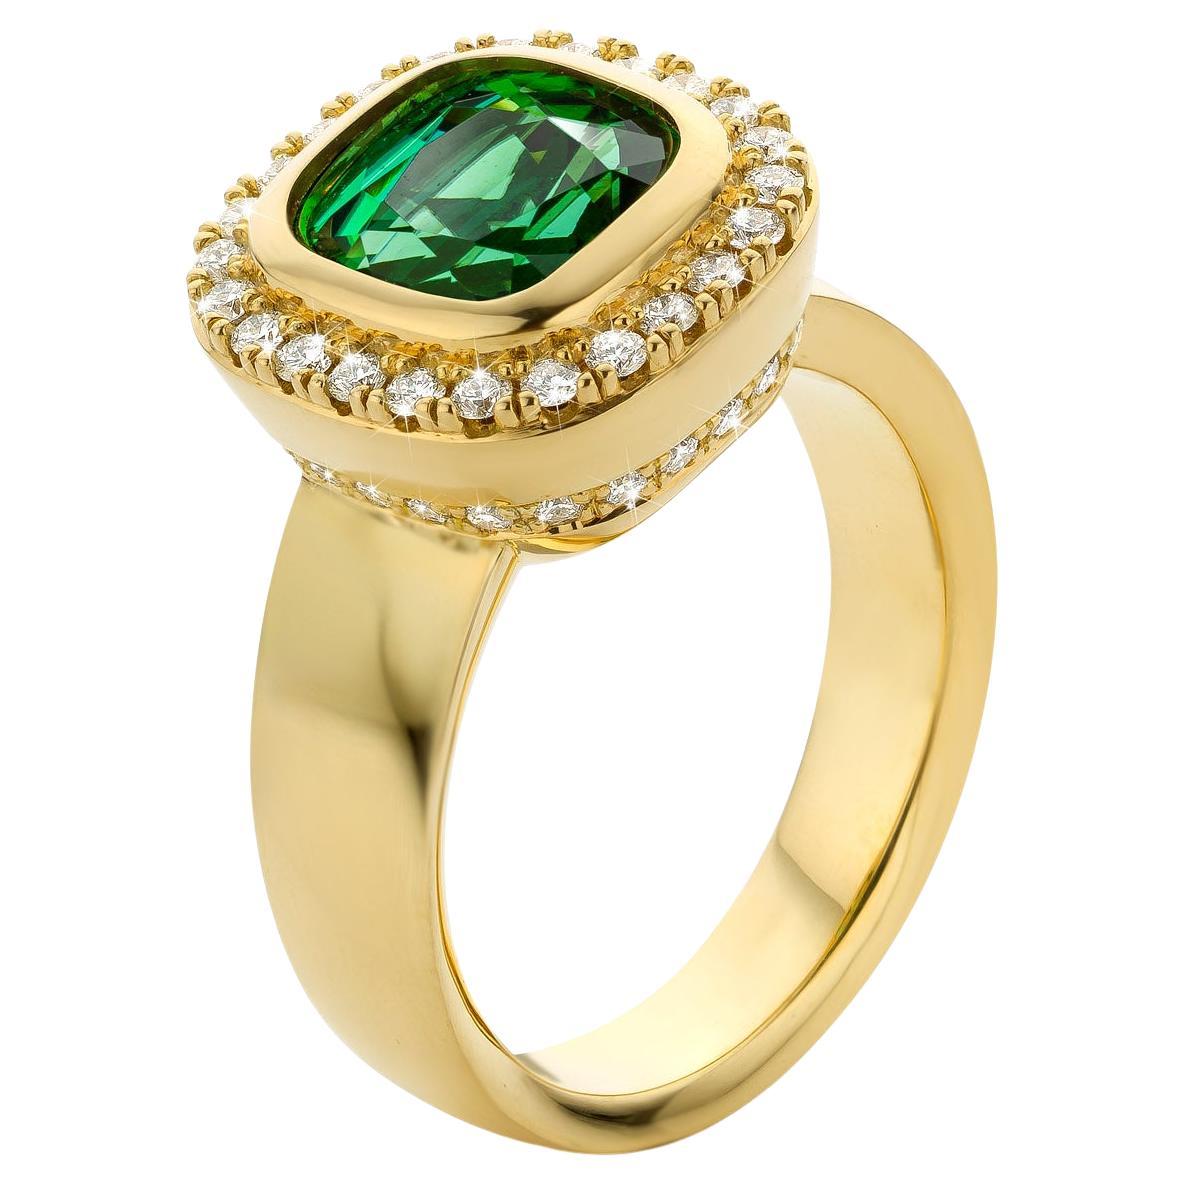 For Sale:  Cober “Dreams of green” grass-green Tourmaline and Brilliant cut Diamonds Ring